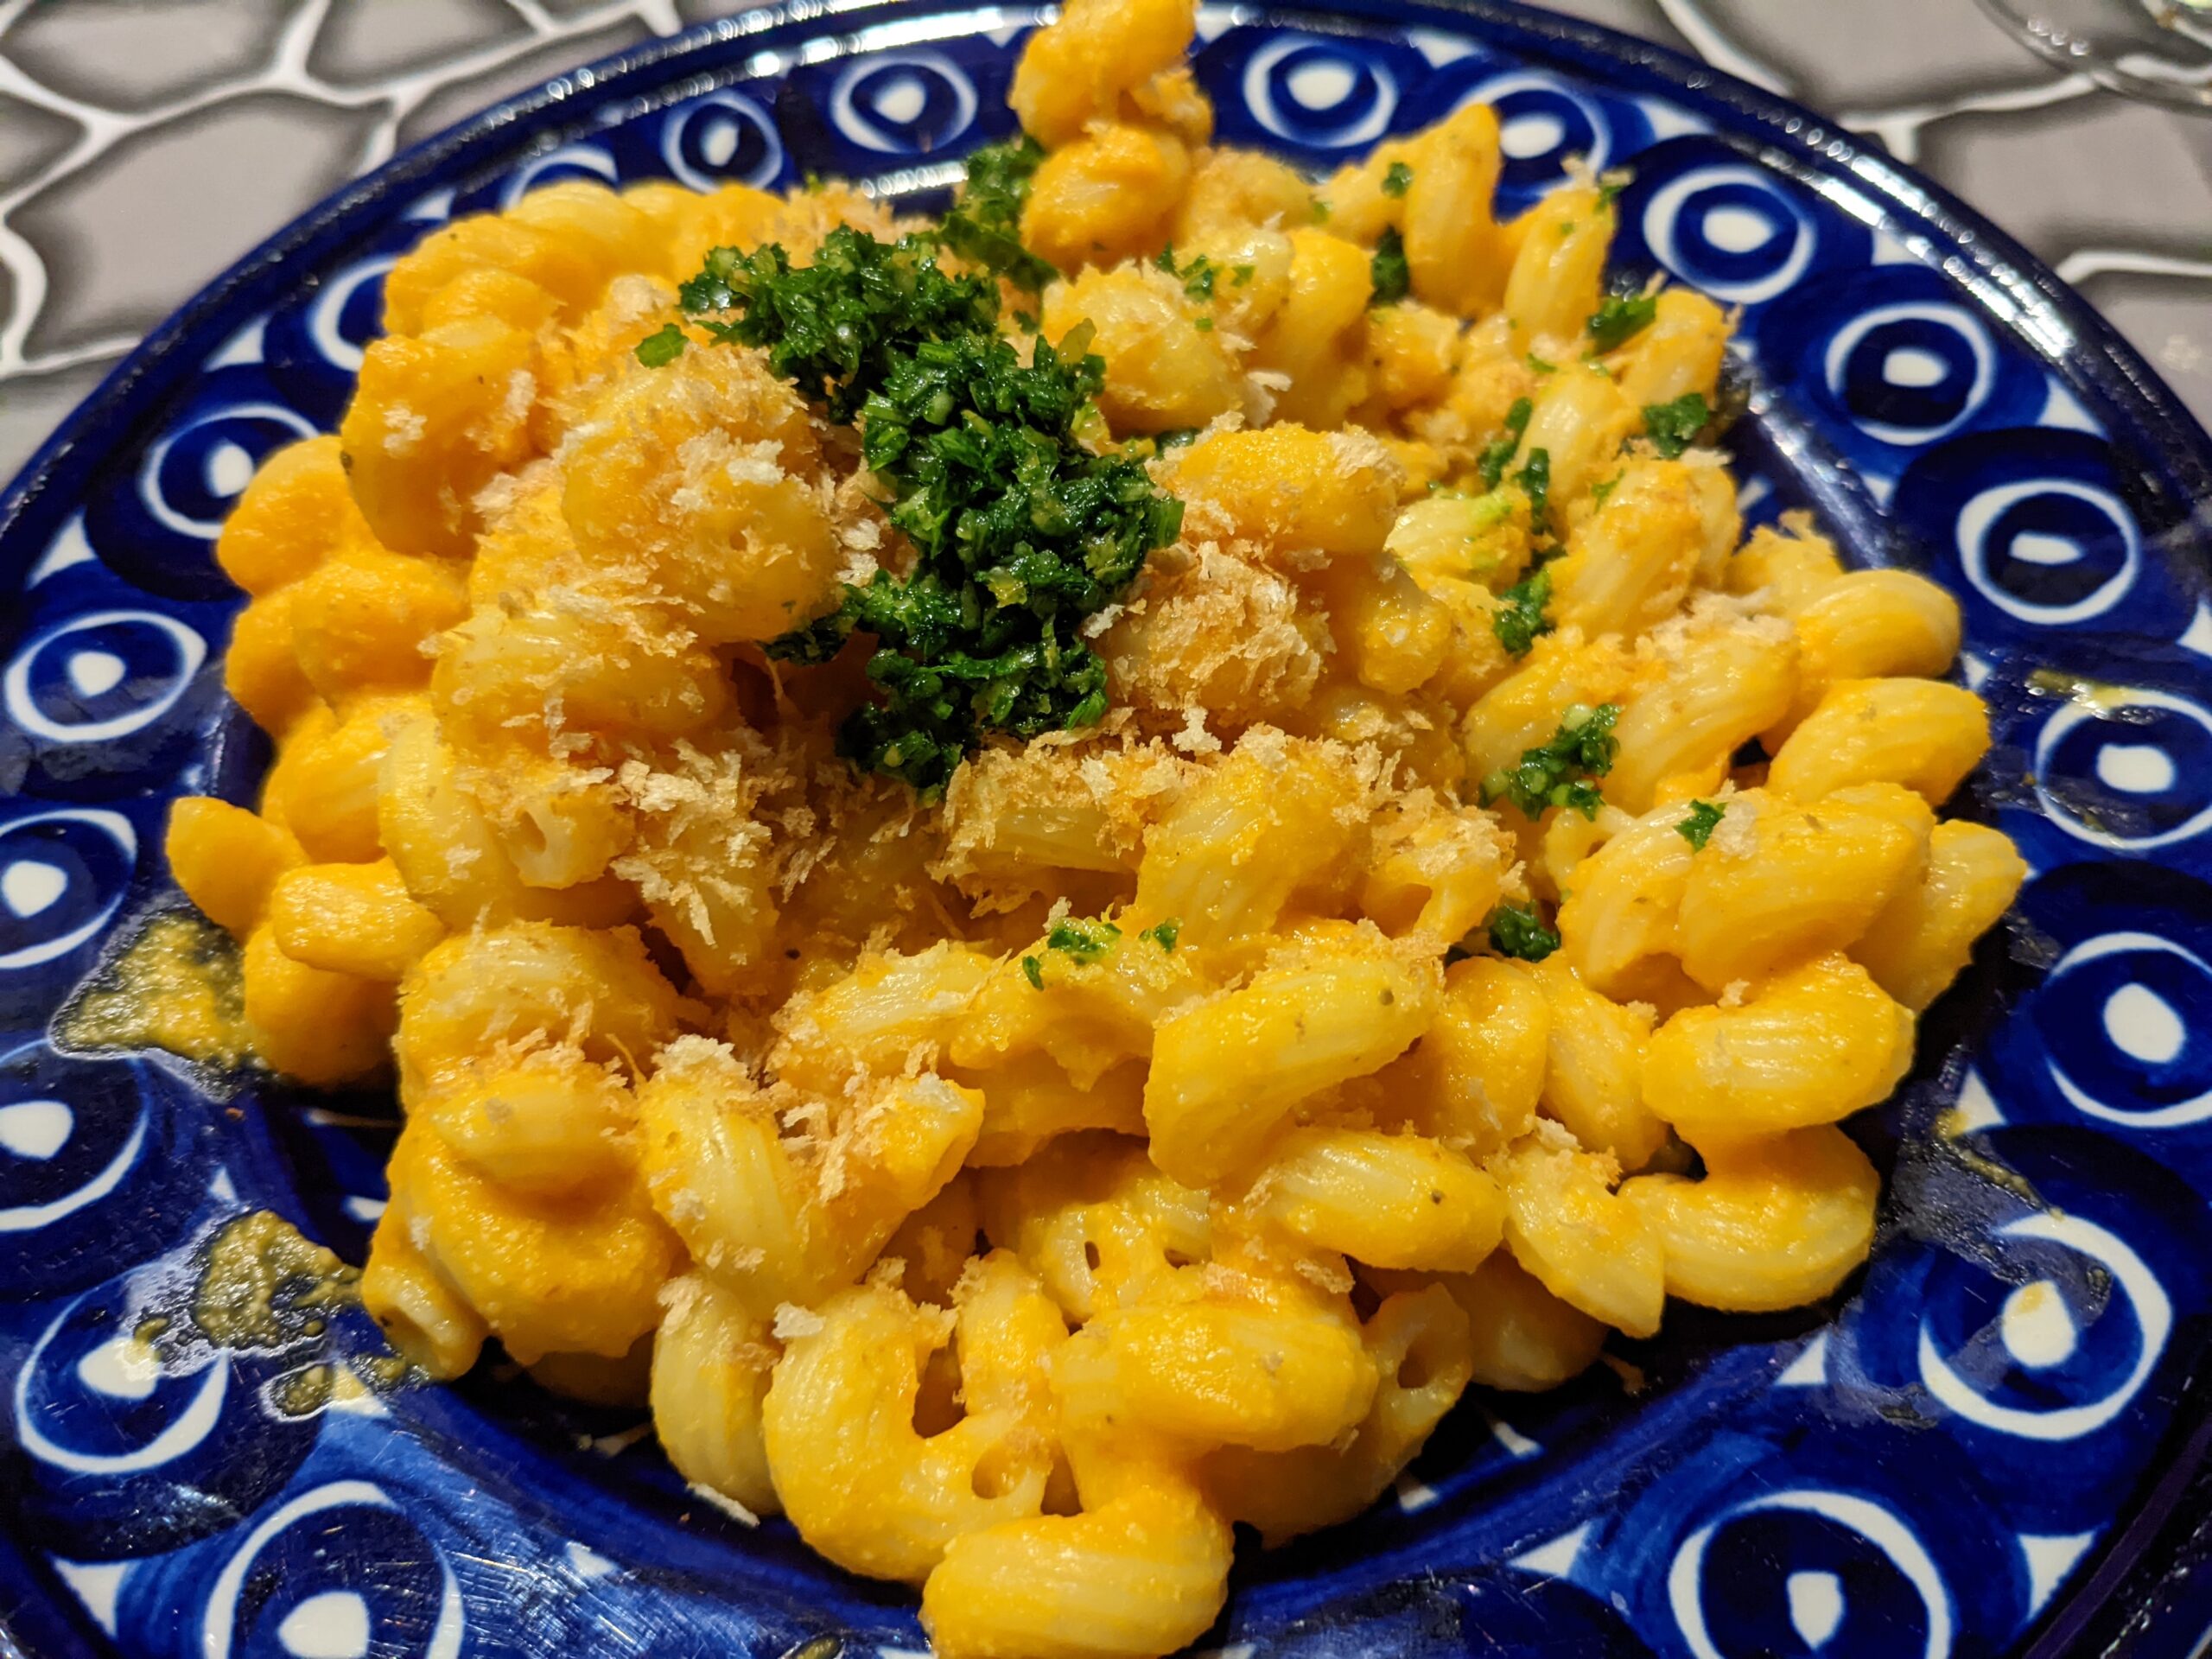 Pasta with Carrot Miso Sauce